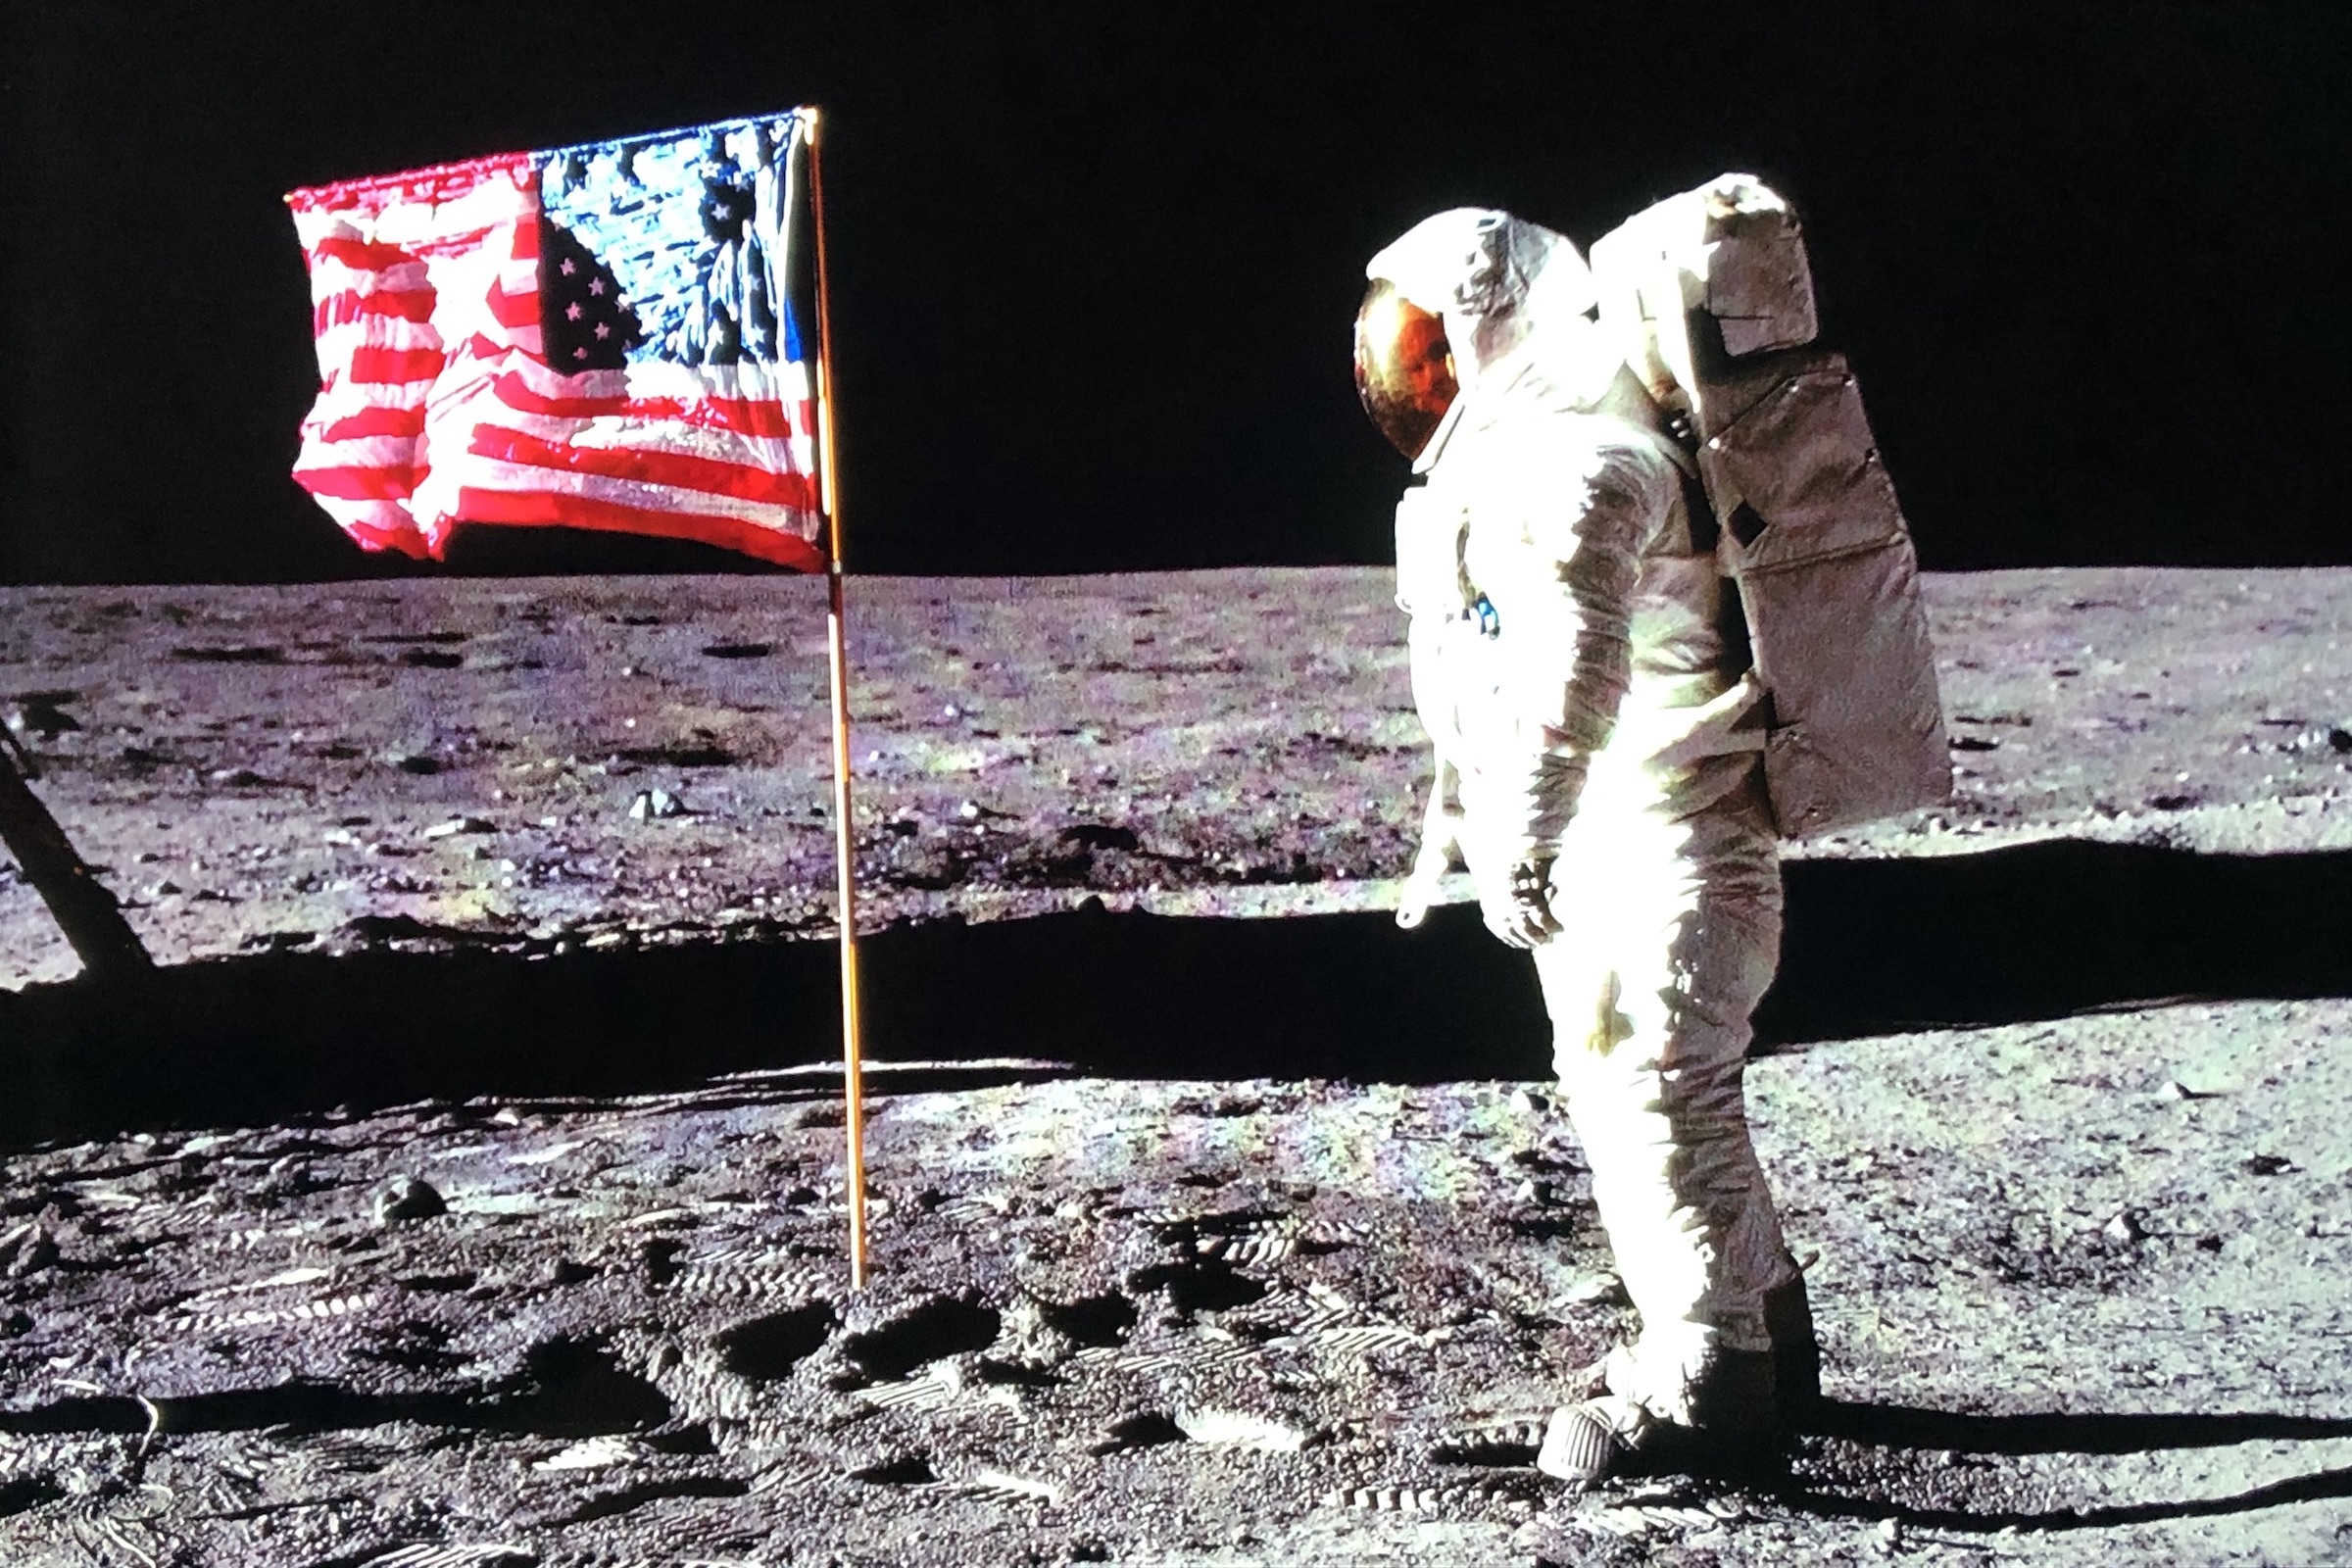 Here S What Music Apollo 11 Astronauts Enjoyed For Their Walk On The Moon Military Com